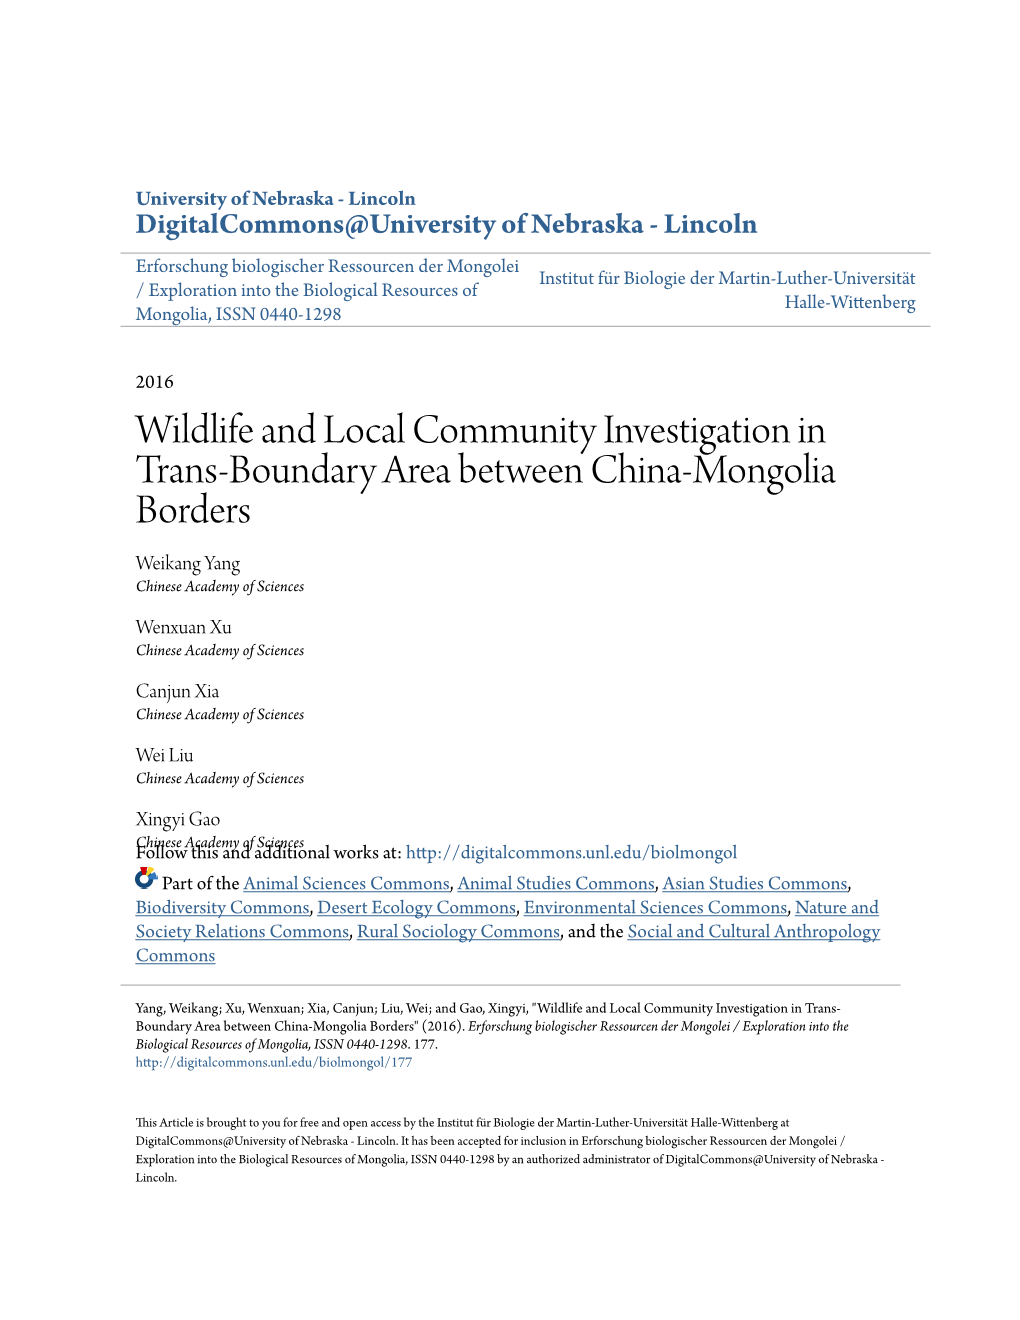 Wildlife and Local Community Investigation in Trans-Boundary Area Between China-Mongolia Borders Weikang Yang Chinese Academy of Sciences